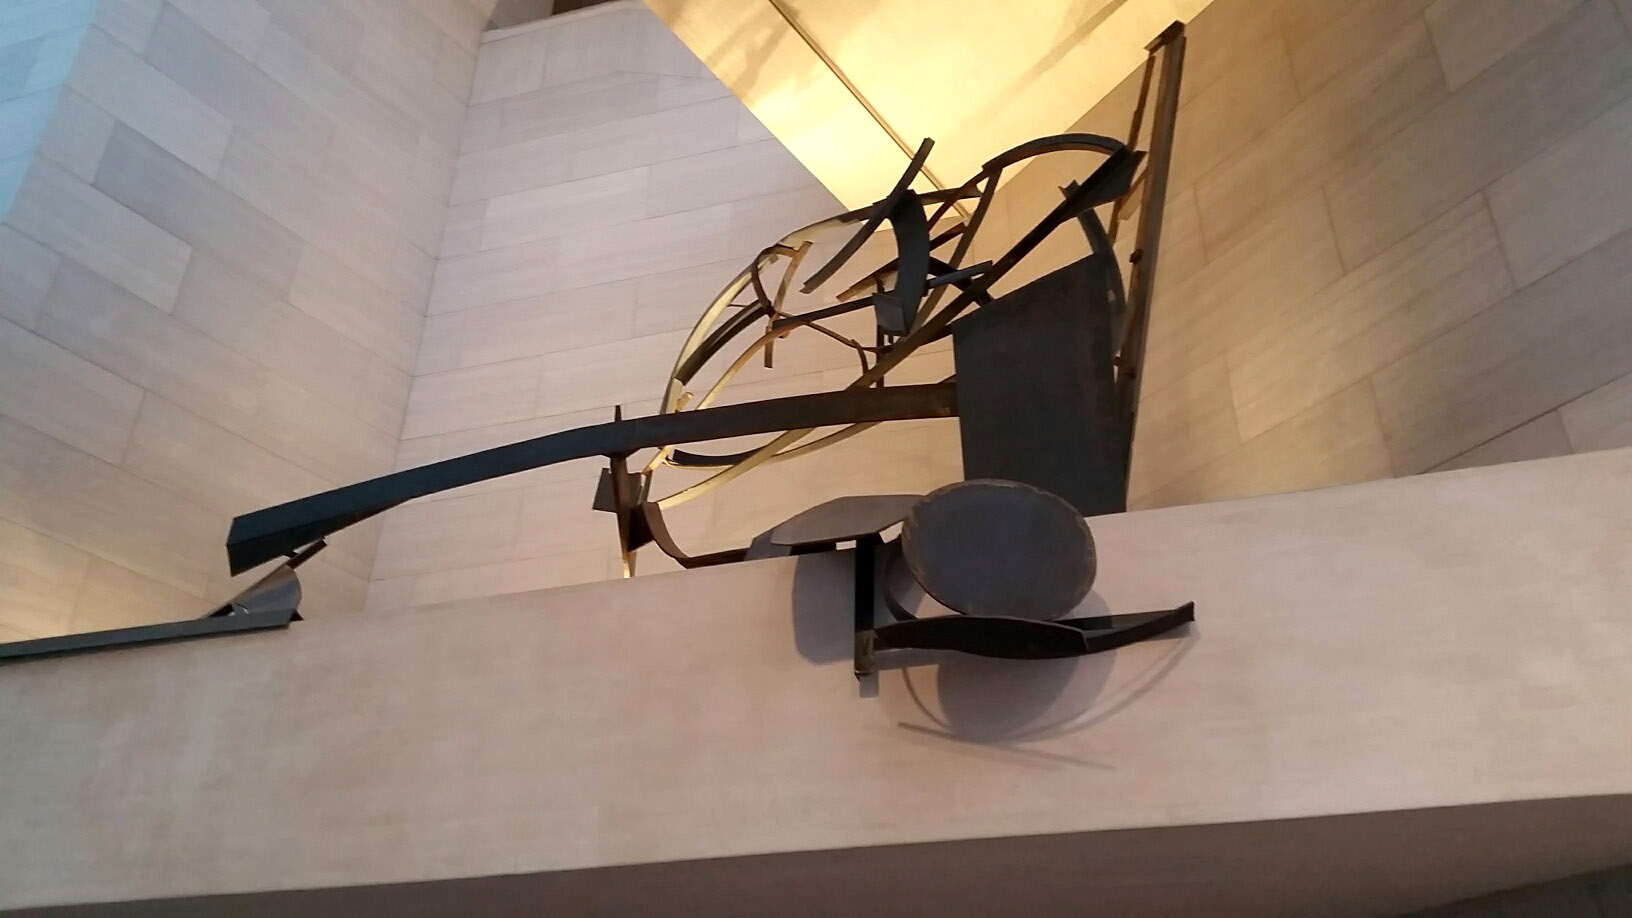 Sir Anthony Caro designed this sculpture for the ledge space in the East Building of the National Gallery of Art. (WTOP/Kathy Stewart)